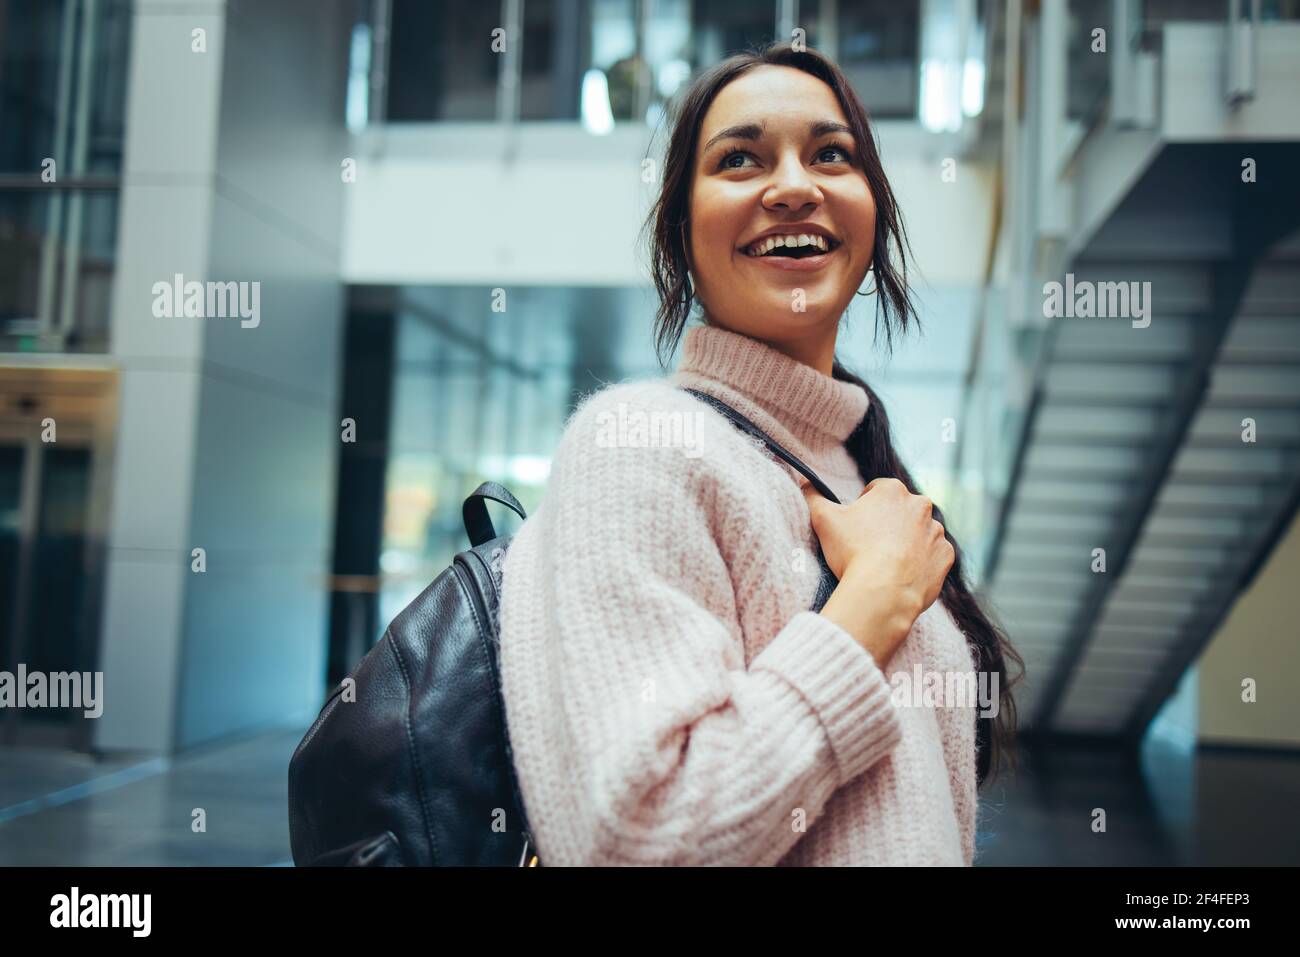 Smiling university student in campus. Happy girl in campus with bag looking over shoulder. Stock Photo